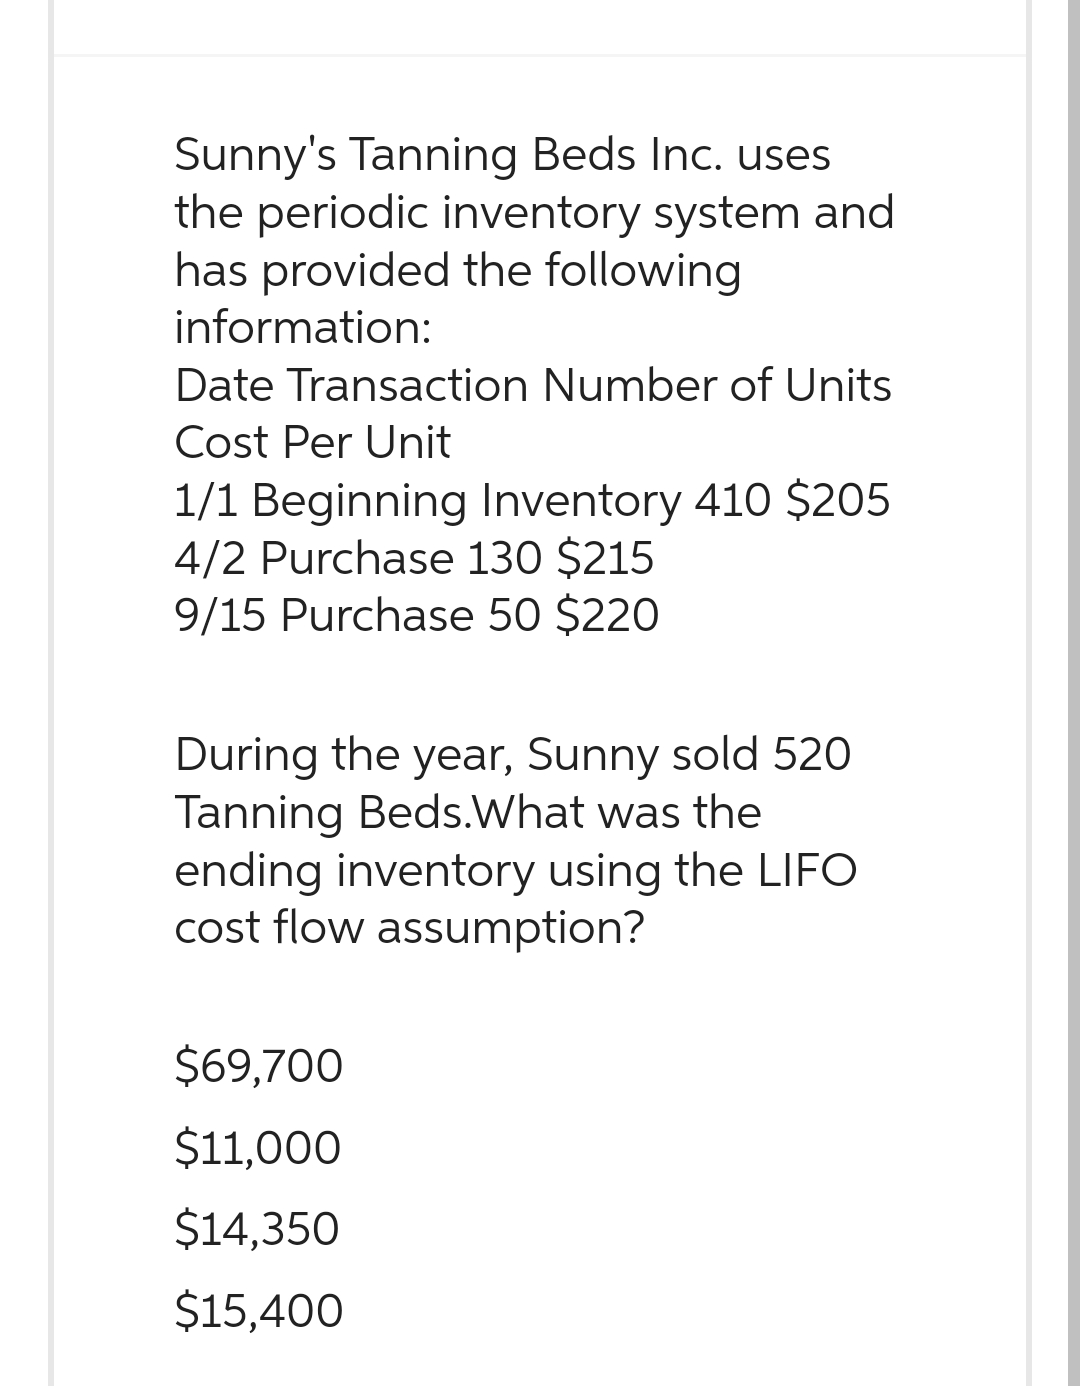 Sunny's Tanning Beds Inc. uses
the periodic inventory system and
has provided the following
information:
Date Transaction Number of Units
Cost Per Unit
1/1 Beginning Inventory 410 $205
4/2 Purchase 130 $215
9/15 Purchase 50 $220
During the year, Sunny sold 520
Tanning Beds. What was the
ending inventory using the LIFO
cost flow assumption?
$69,700
$11,000
$14,350
$15,400